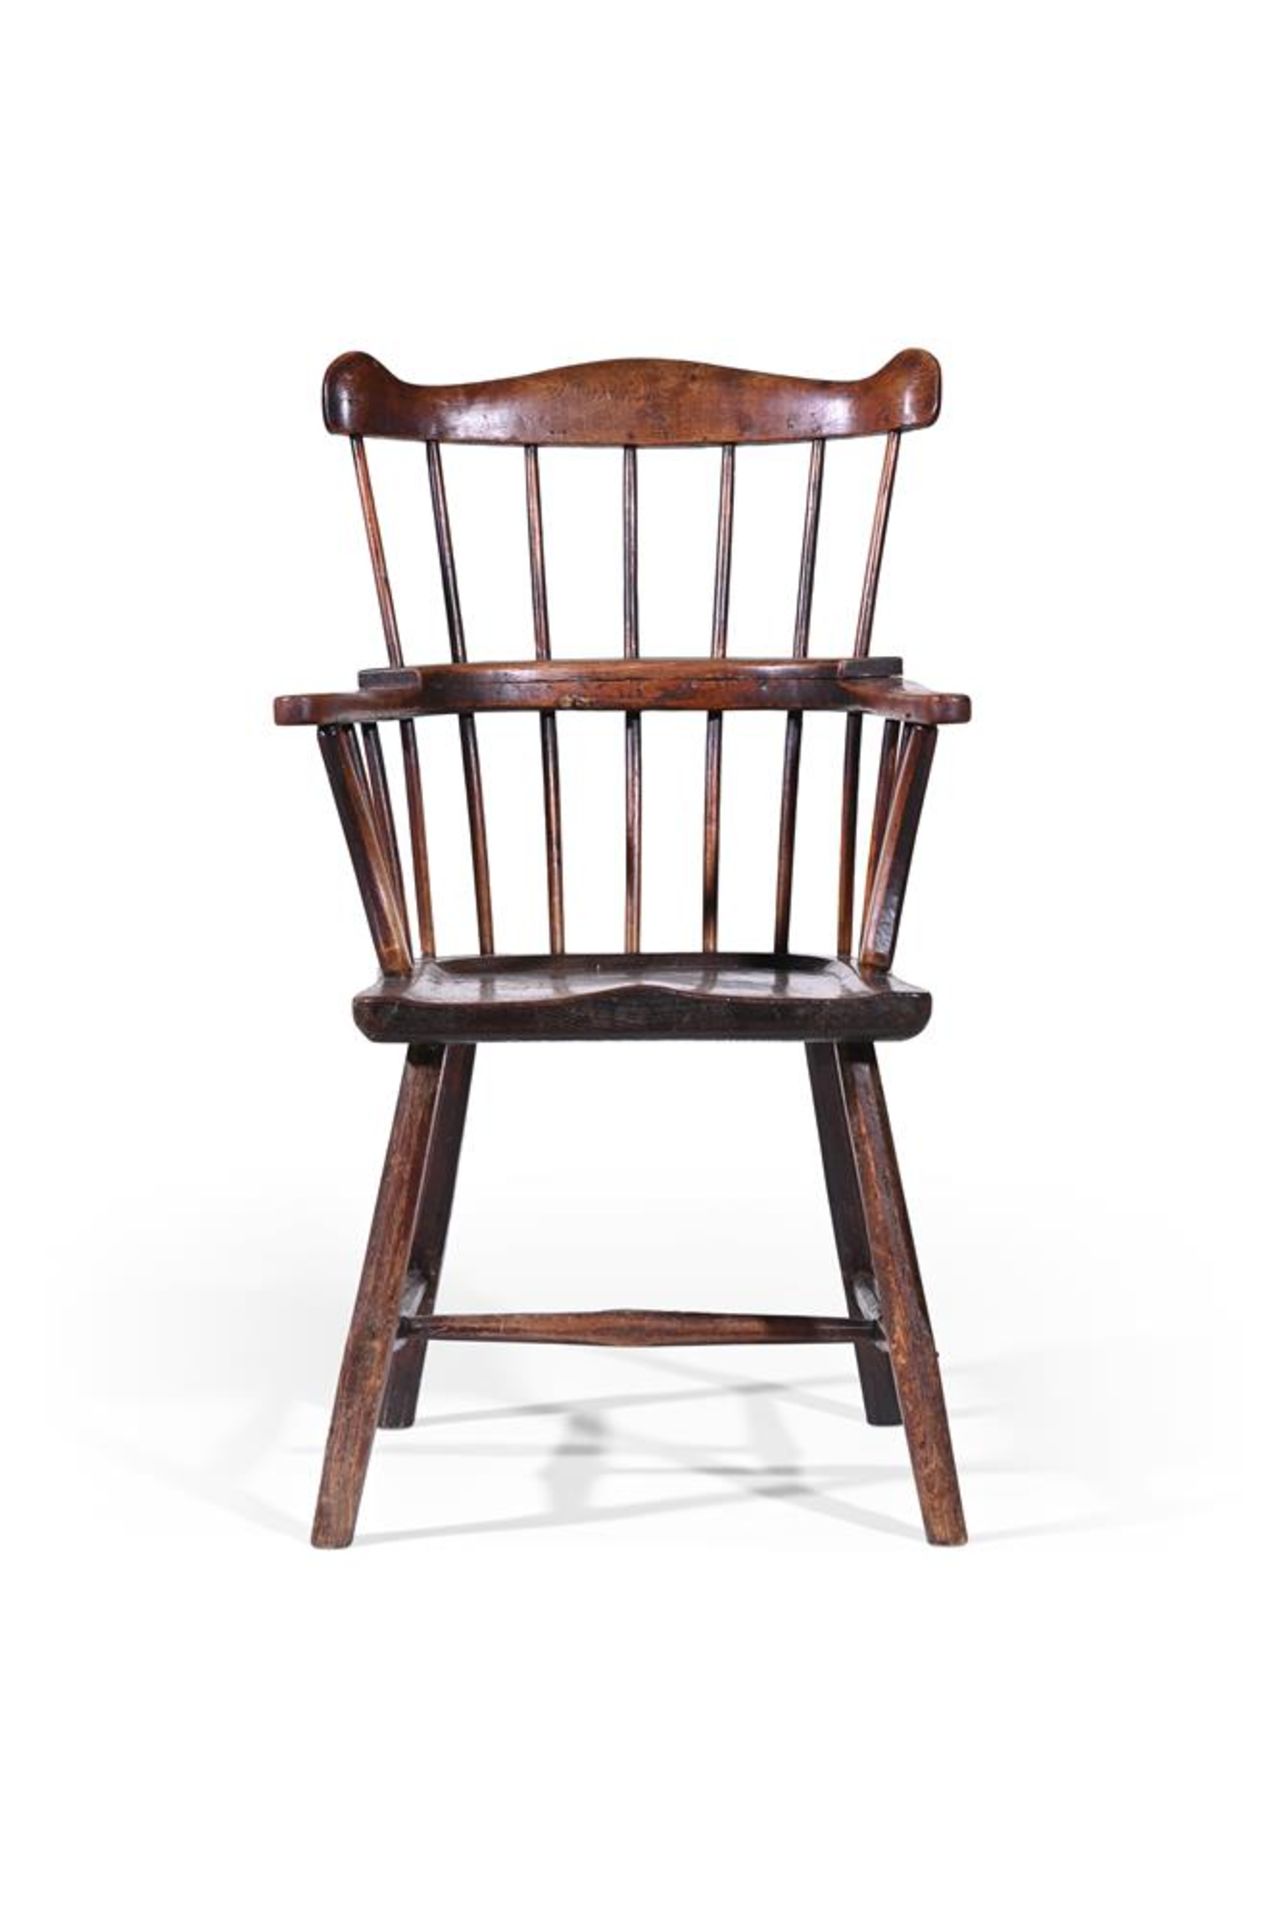 AN ELM AND ASH STICK BACK ARMCHAIR, PROBABLY WELSH, 18TH CENTURY - Image 2 of 2